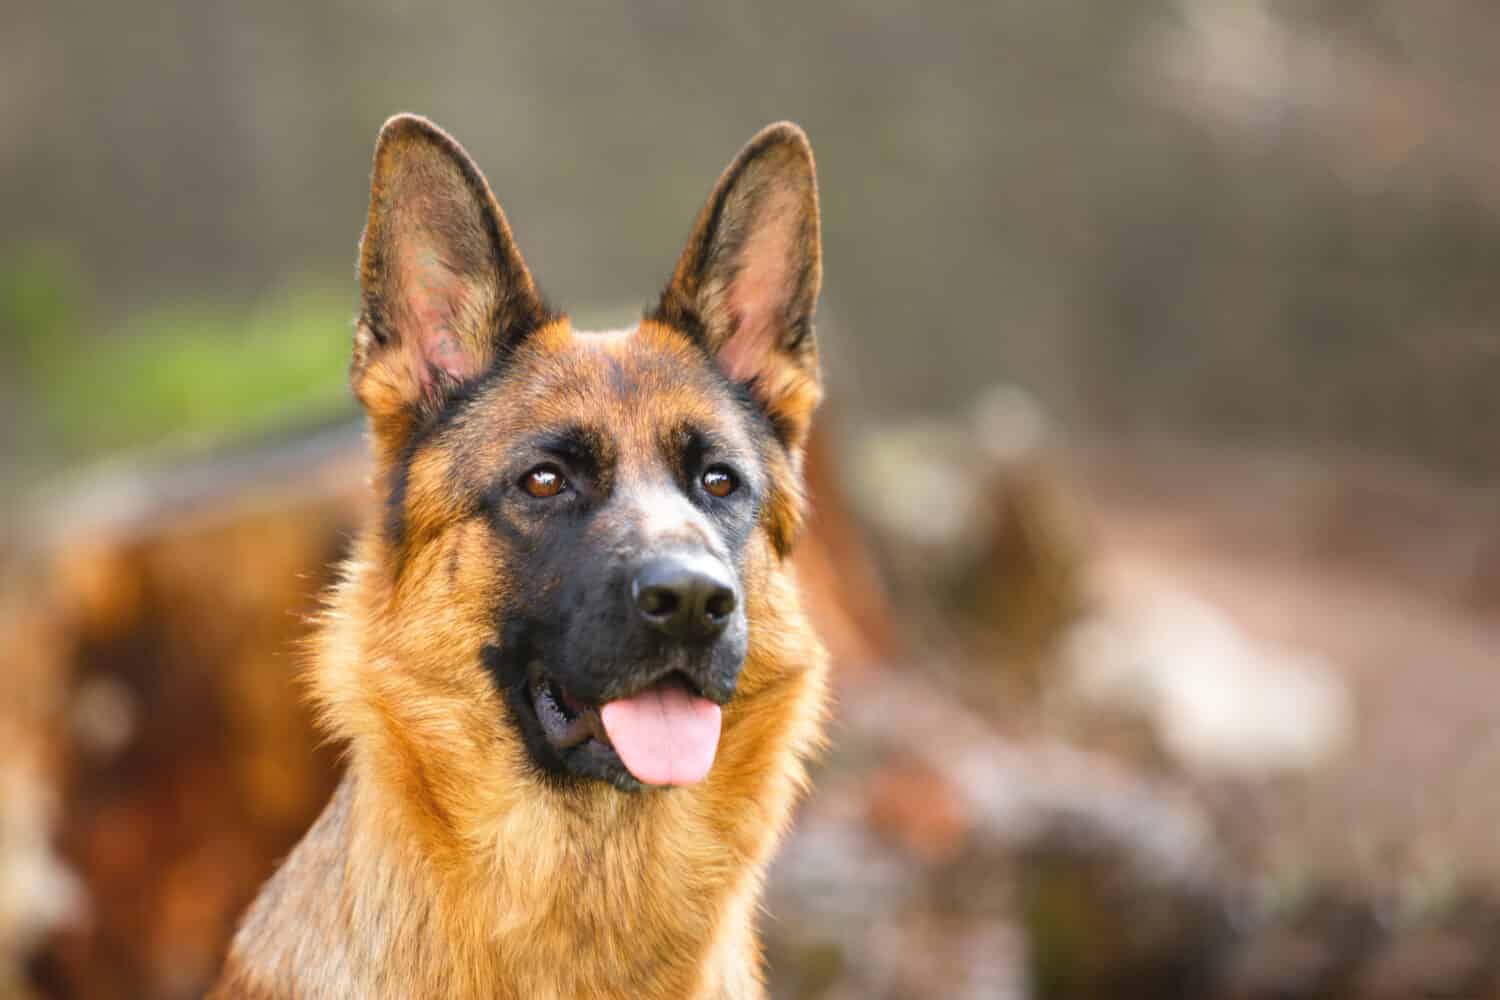 Epilepsy is uncommon but is a reported German shepherd health problem. 